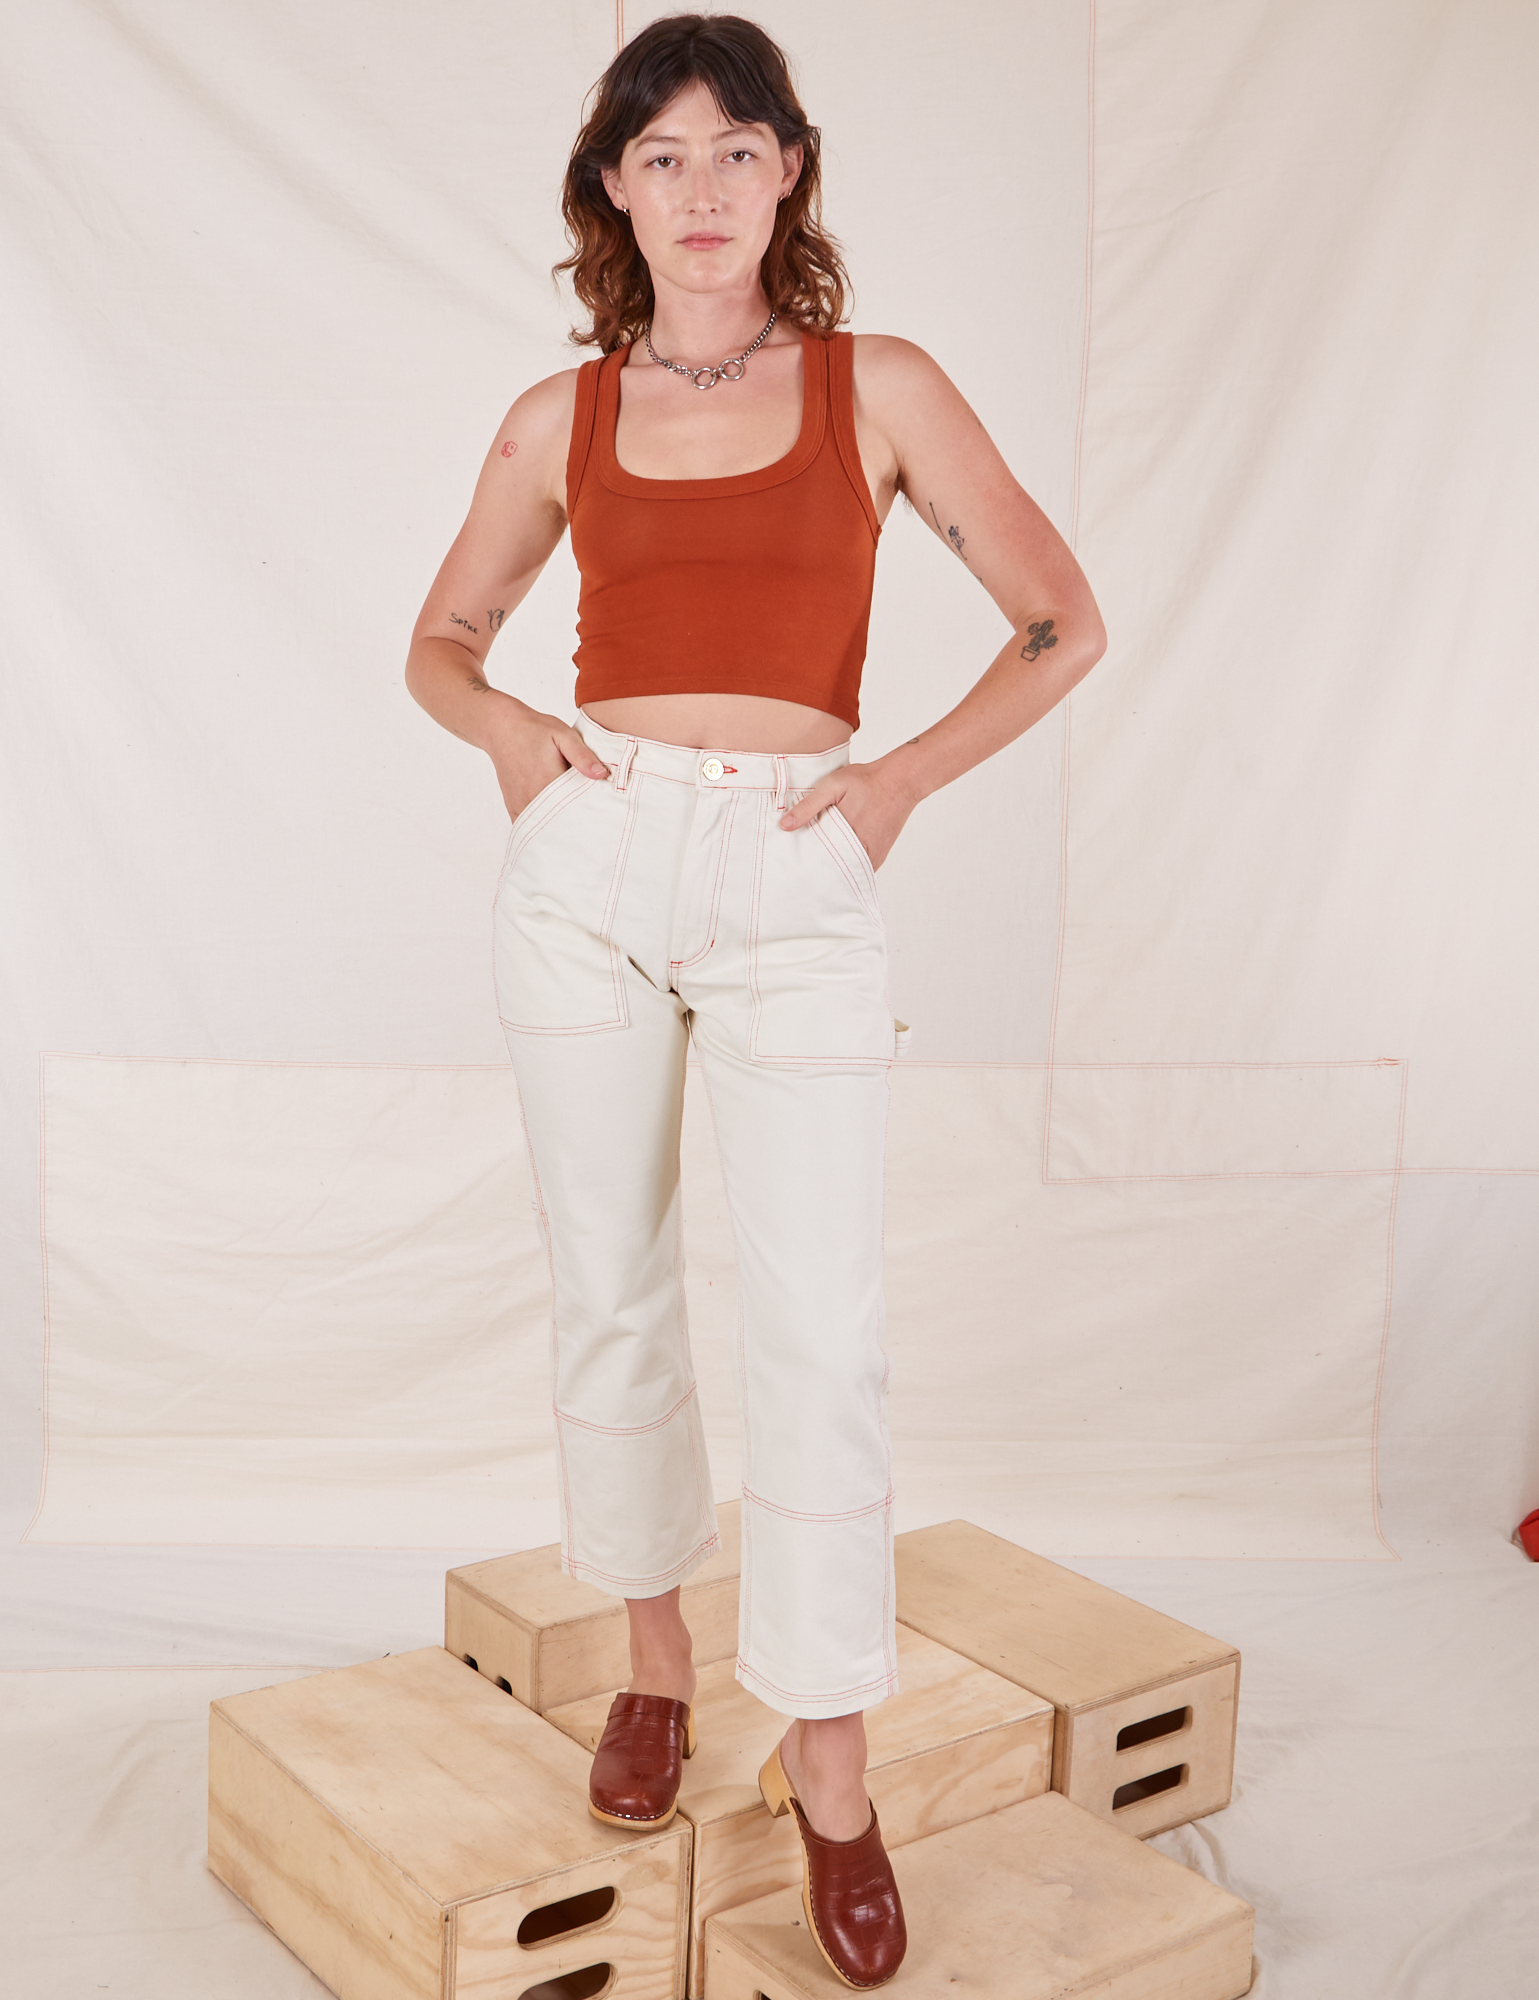 Alex is wearing Carpenter Jeans in Vintage Tee Off-White and burnt terracotta Cropped Tank Top